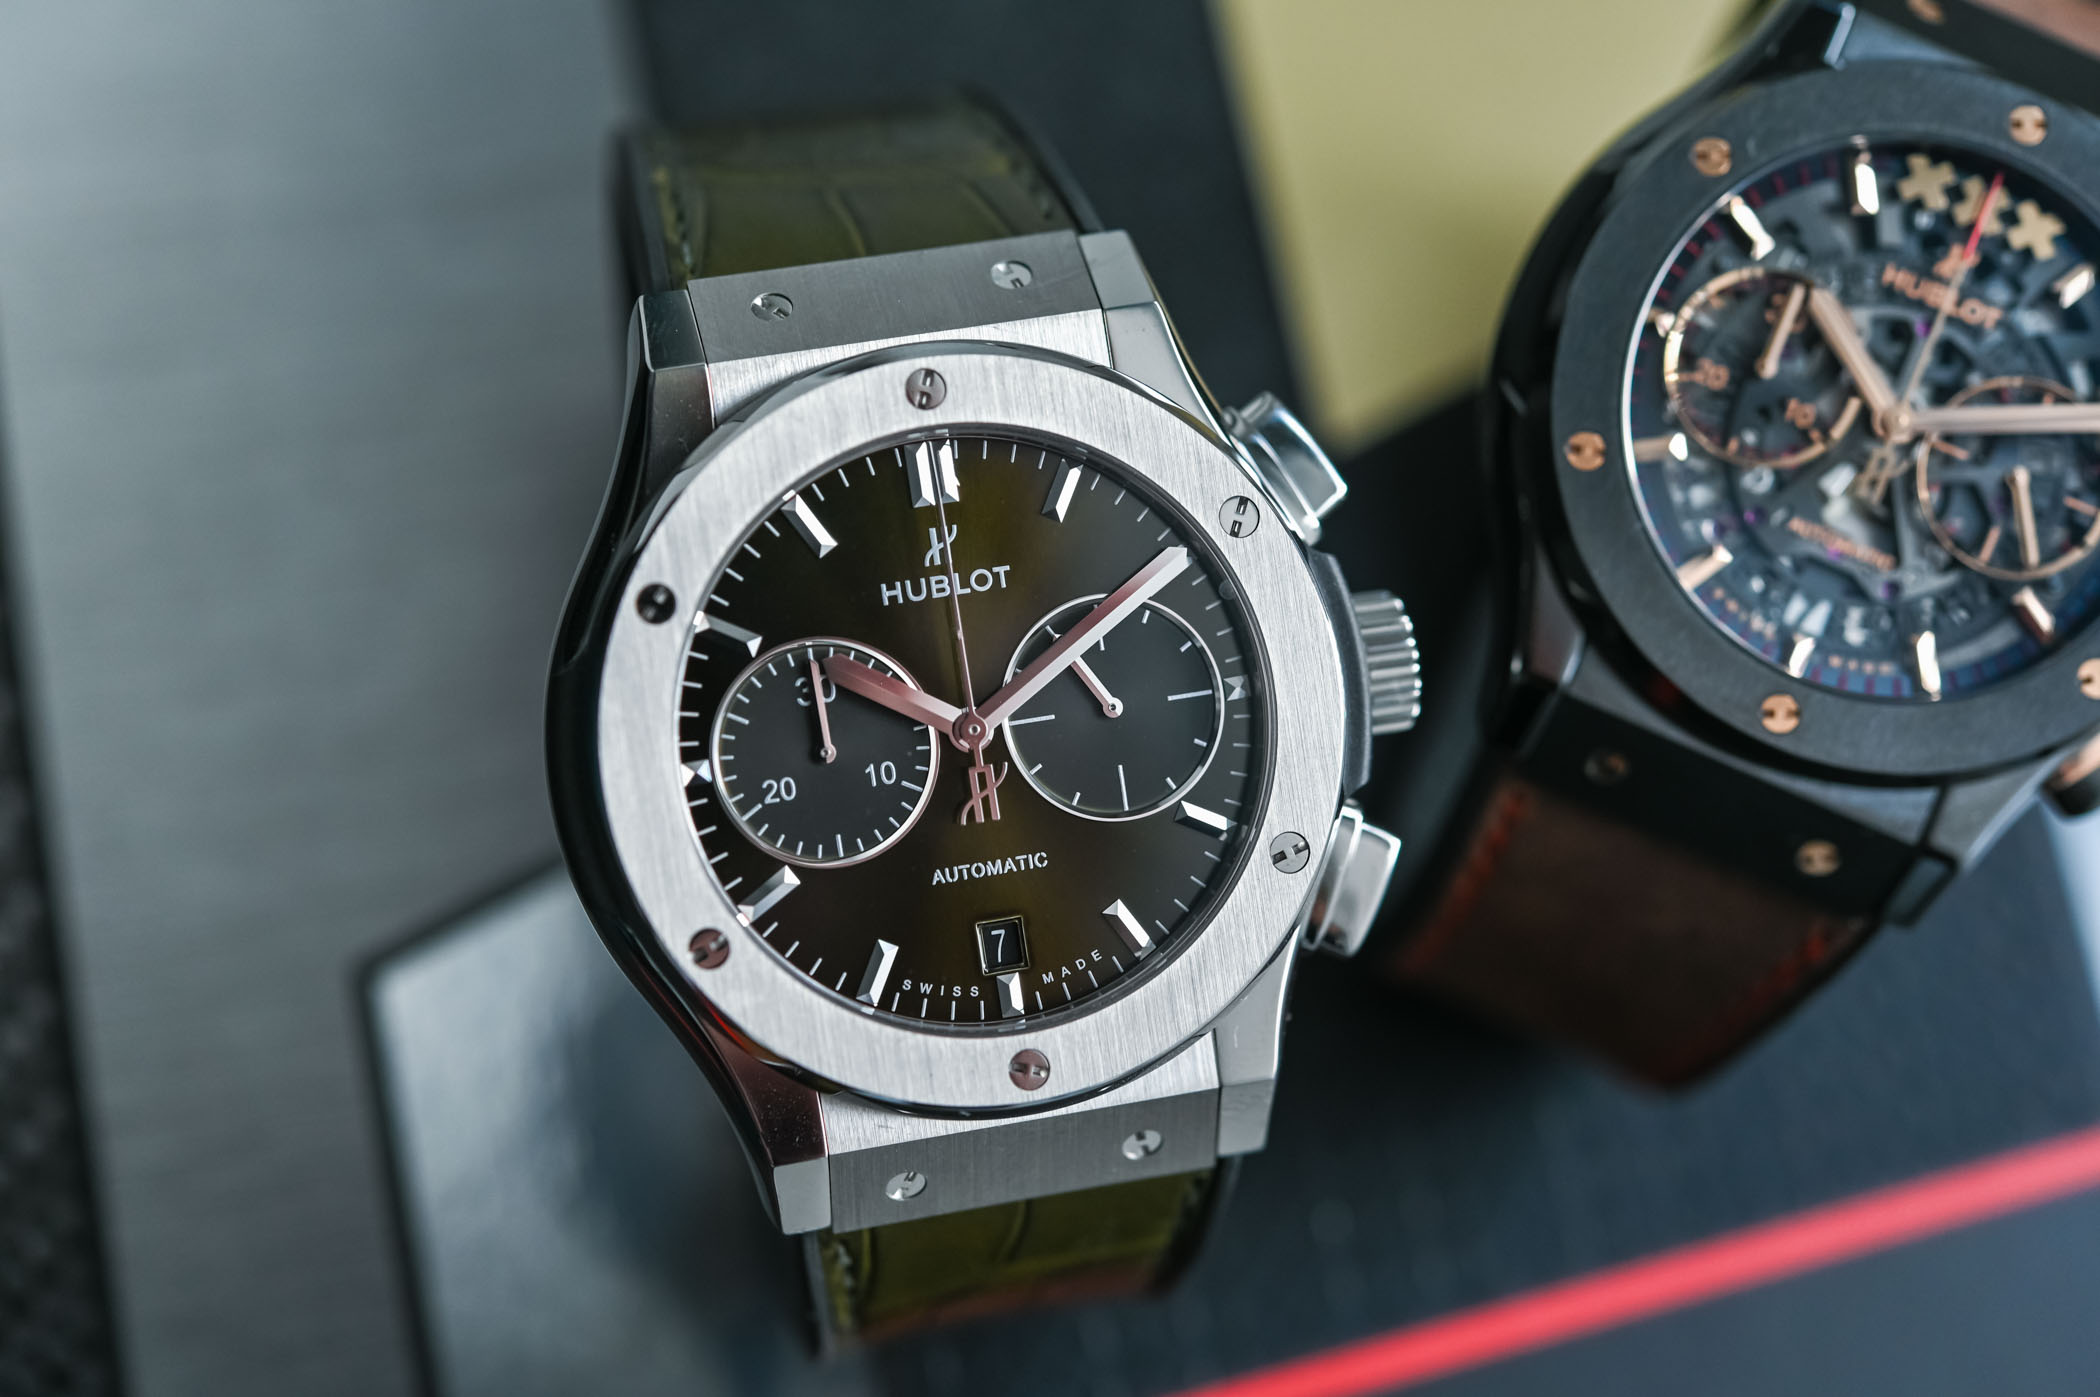 Hublot Watch: A Timepiece That Integrates Life Cycle and Elements